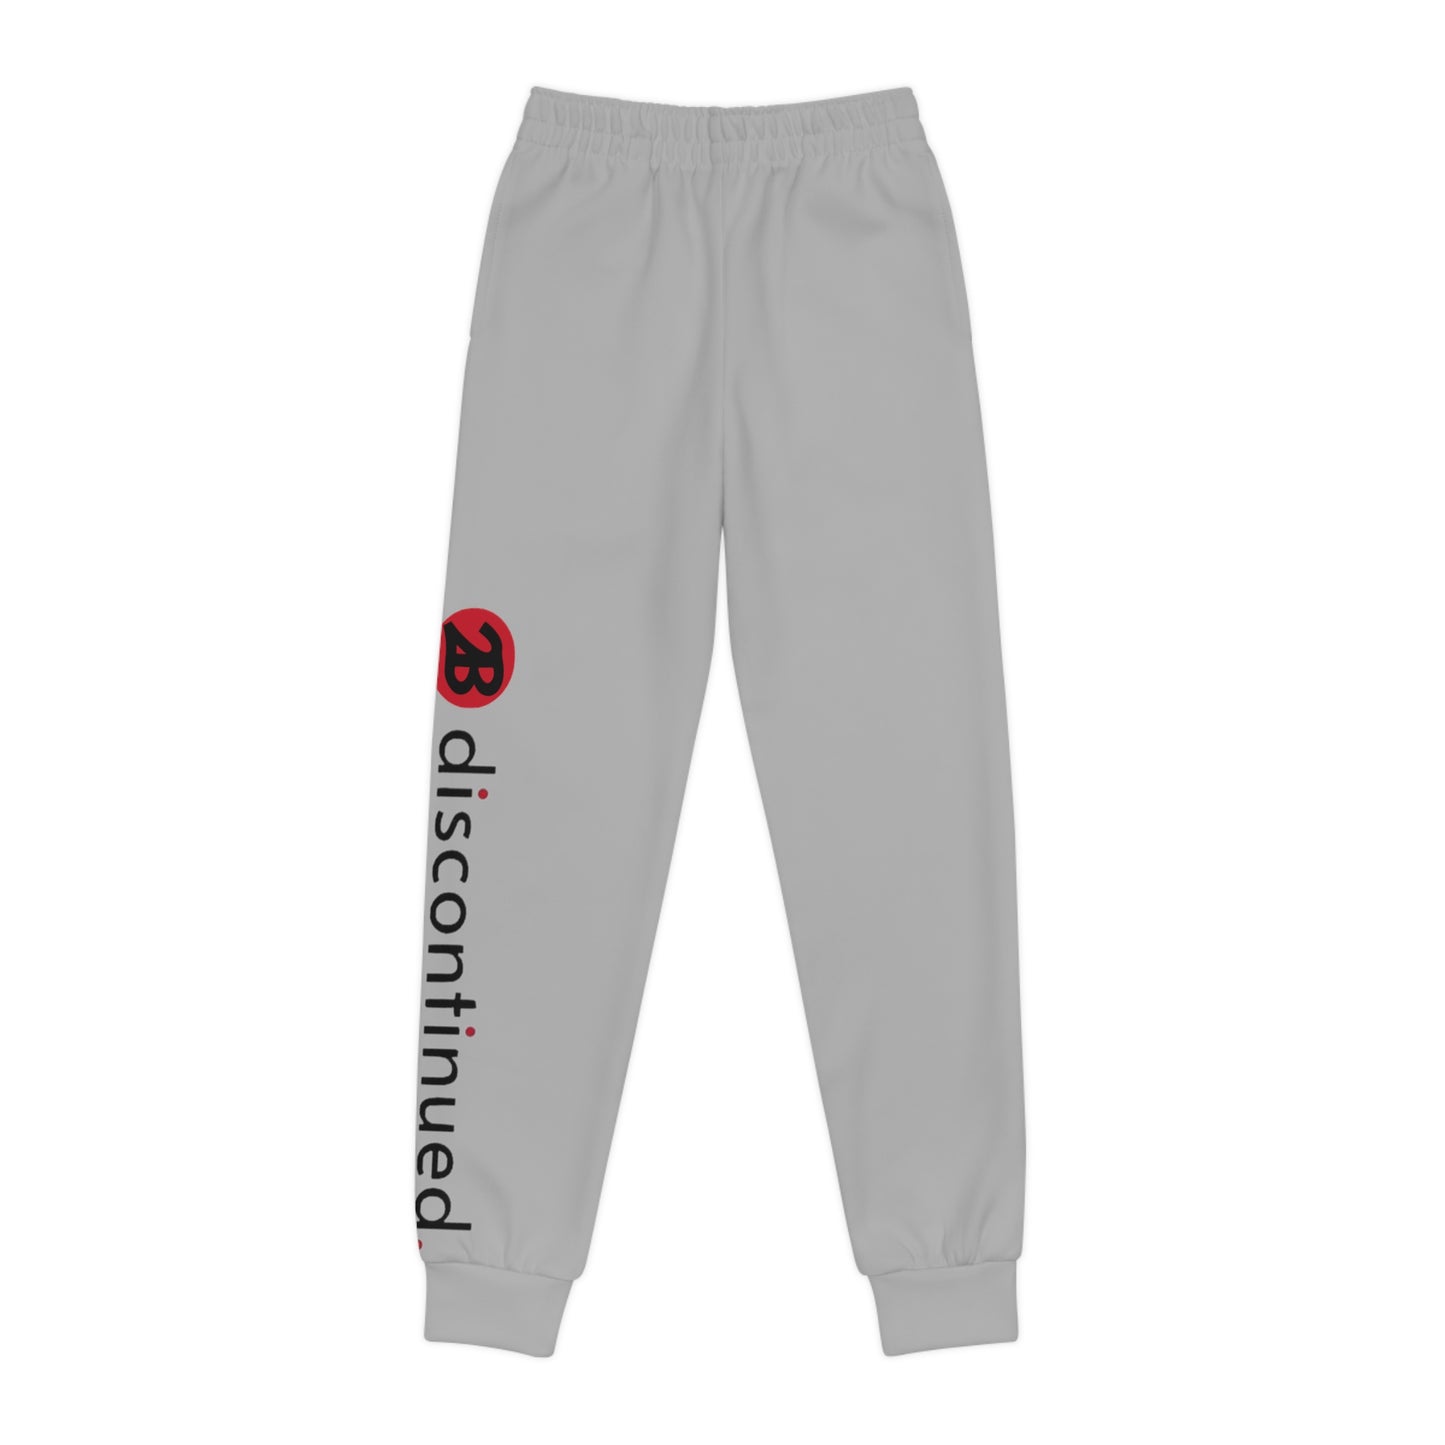 2Bdiscontinued. youth joggers lhtgry